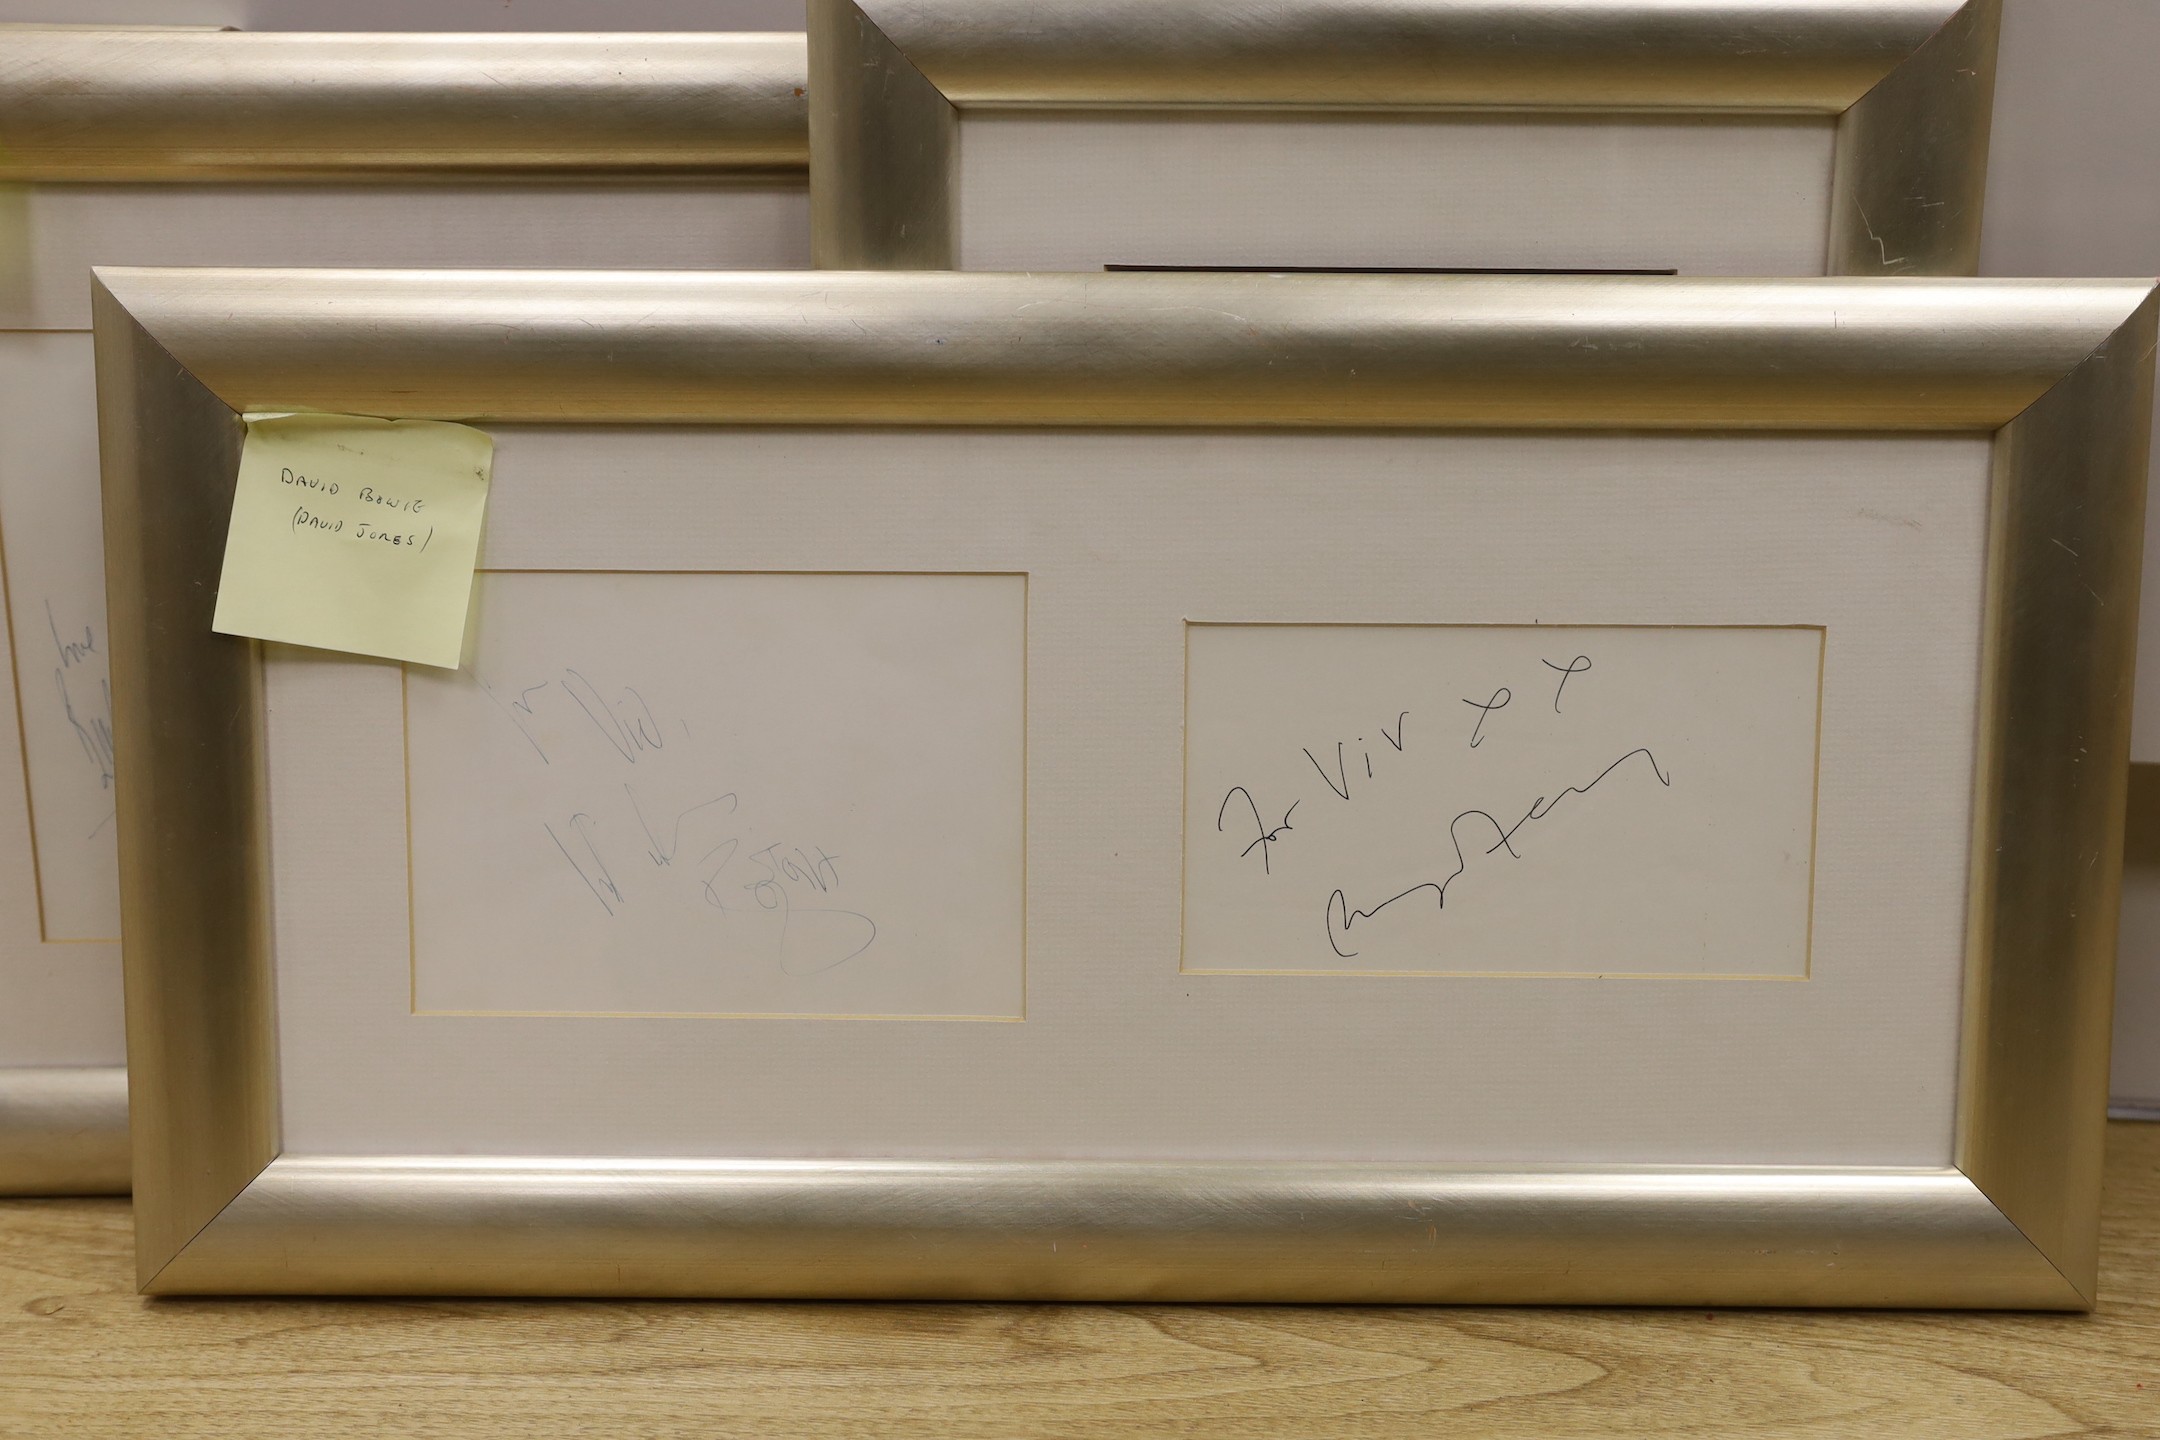 A collection of mostly framed autographs to include an event card from Elton John, 25 March 1994 signed by Charlie Watts, Jerry Hall and Jerry Hall, together with autographs by David Bowie, Phil Collins, David Bailey, Da